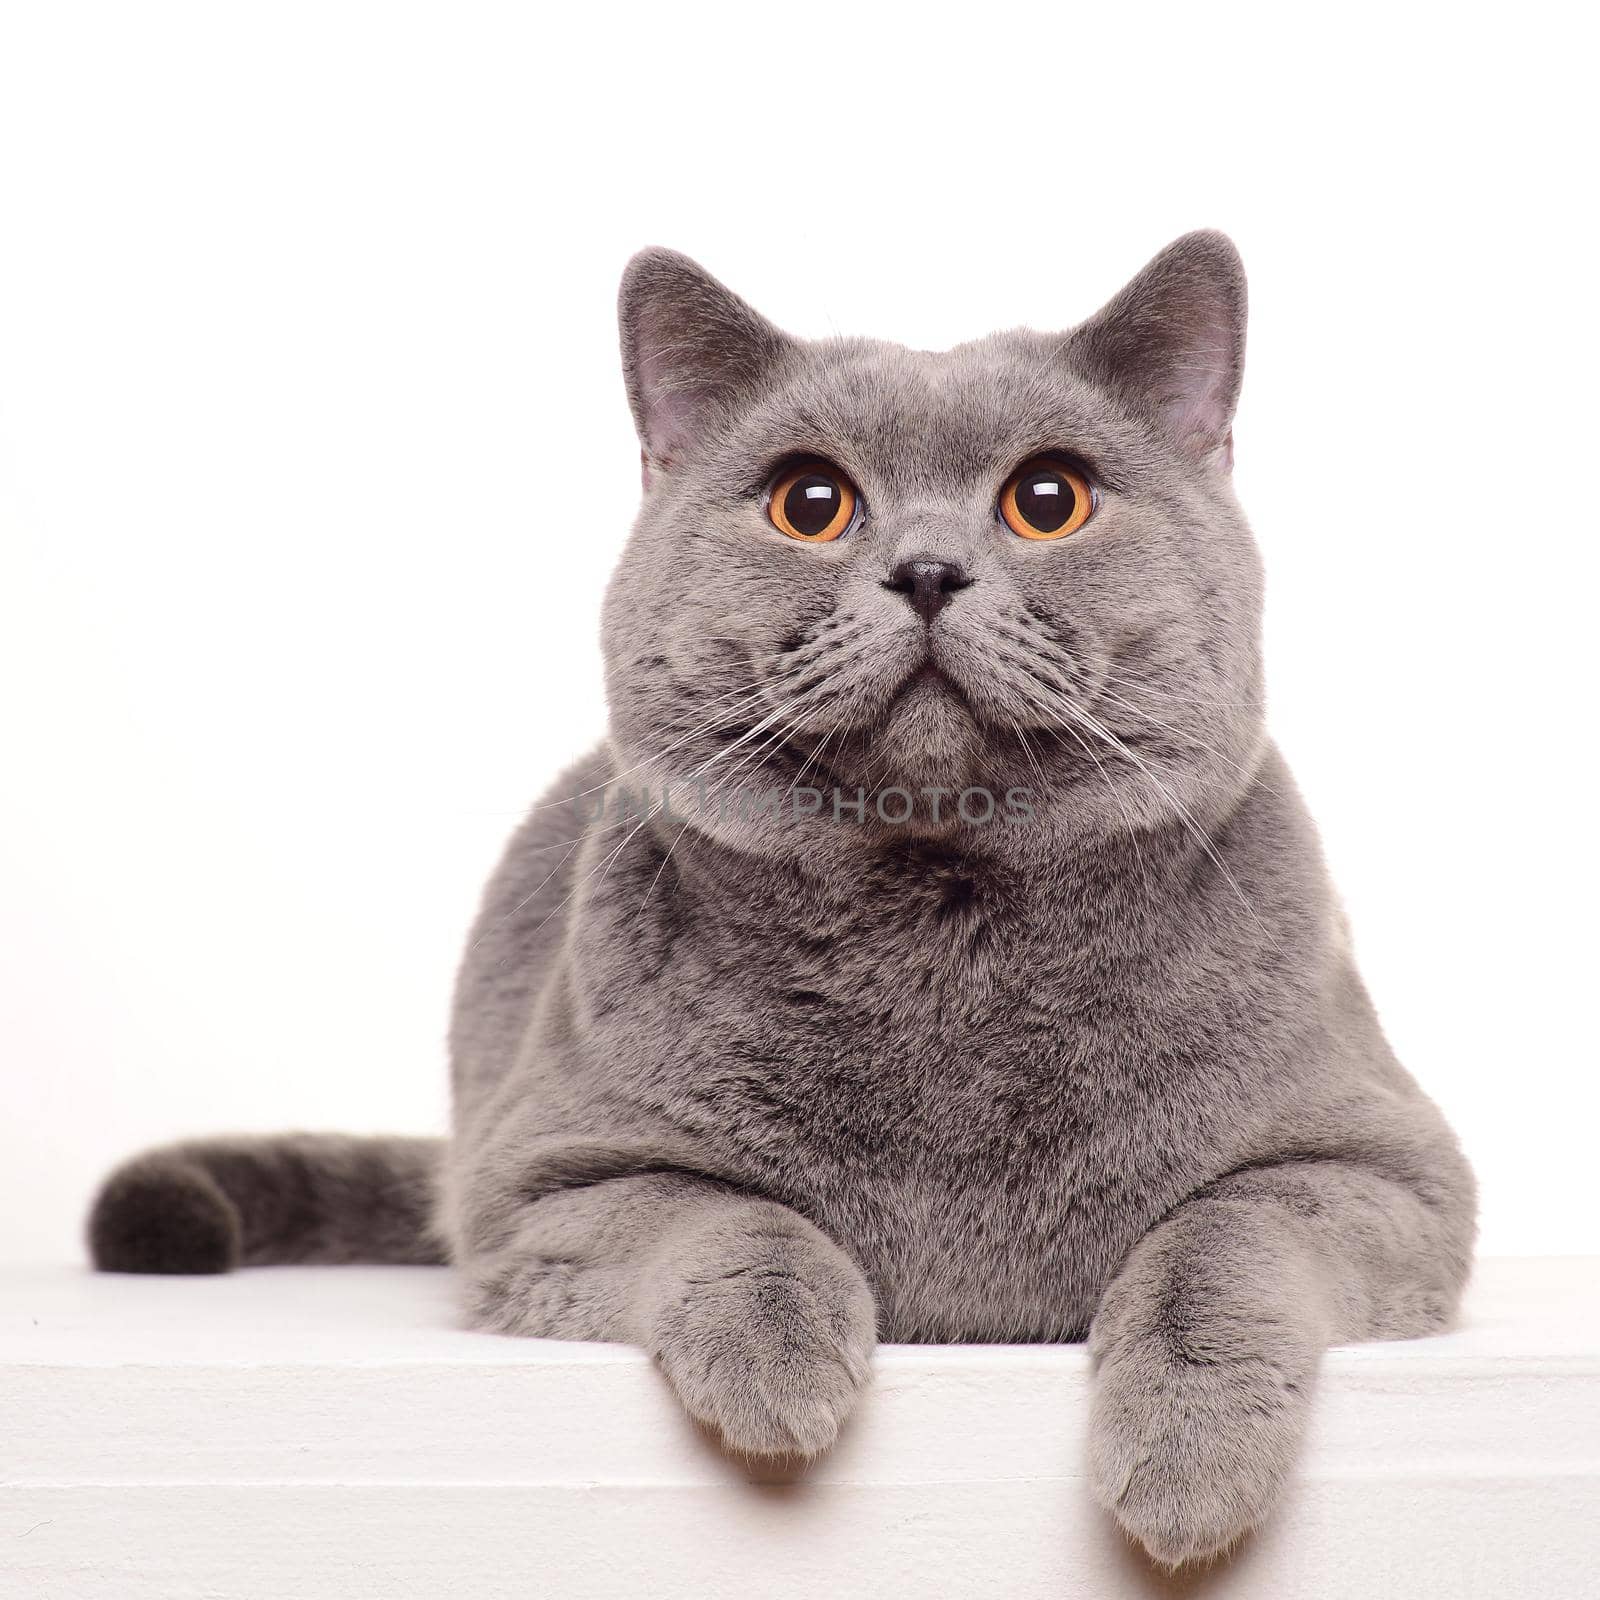 Surprised British Shorthair cat isolated on white.